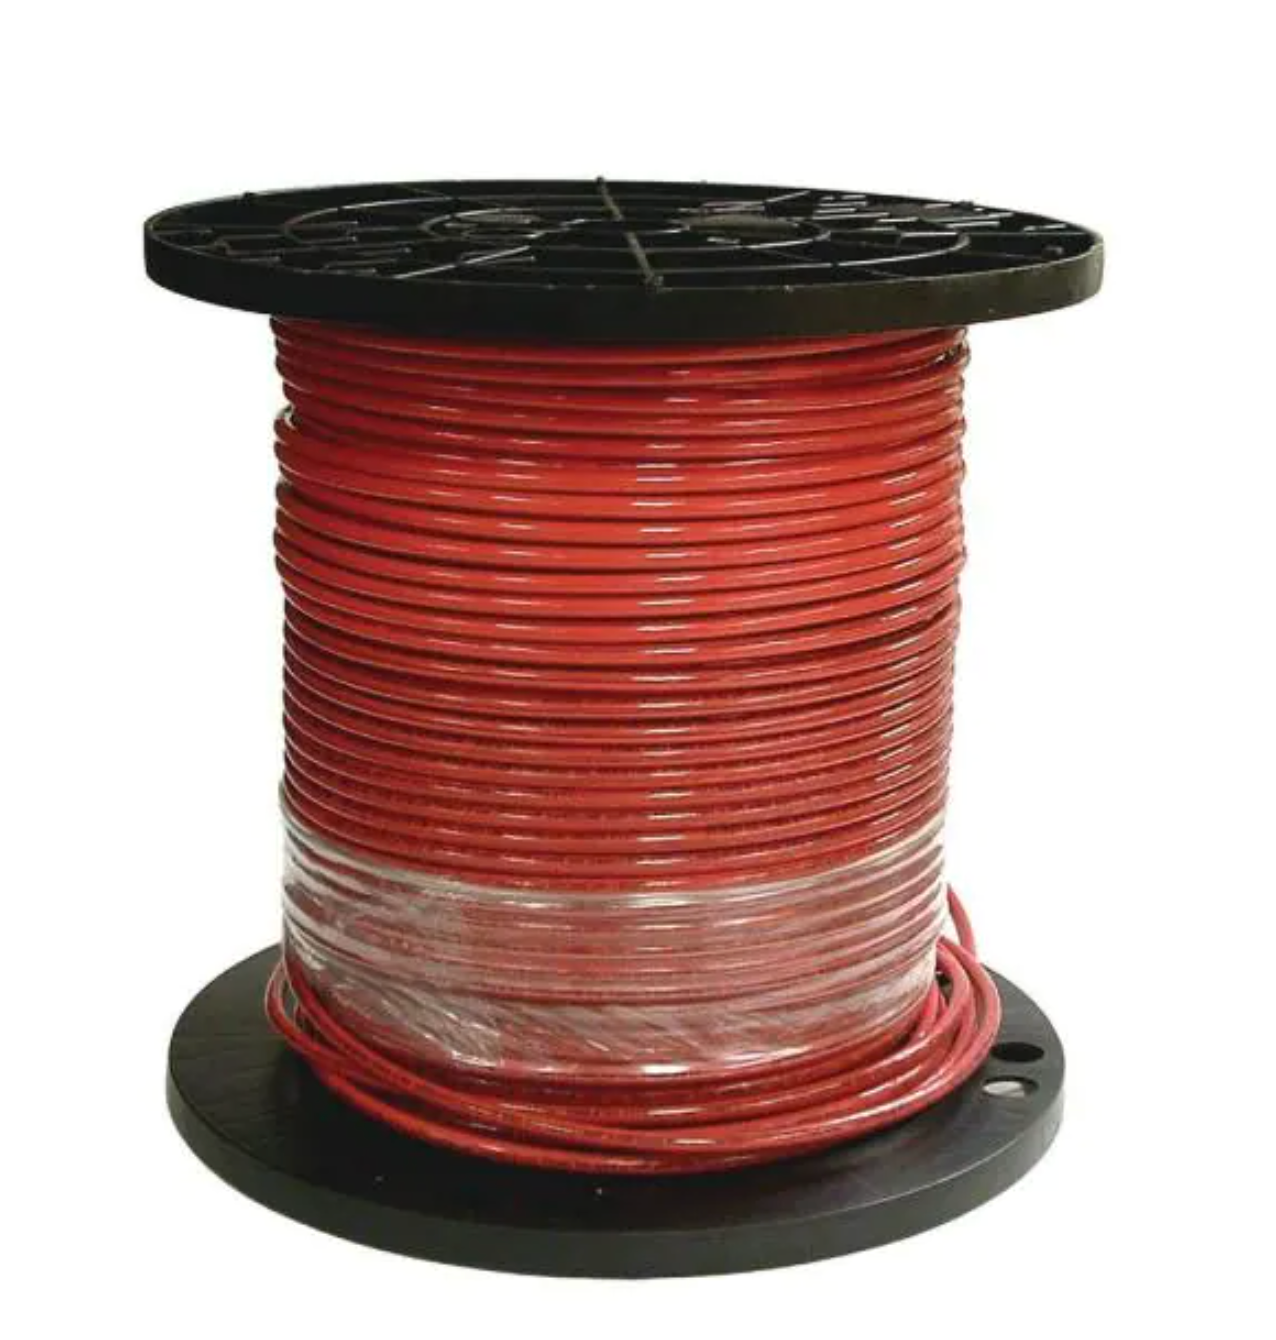 30' EA THHN THWN 6 AWG GAUGE BLACK WHITE RED + 8 awg GREEN STRANDED COPPER  WIRE